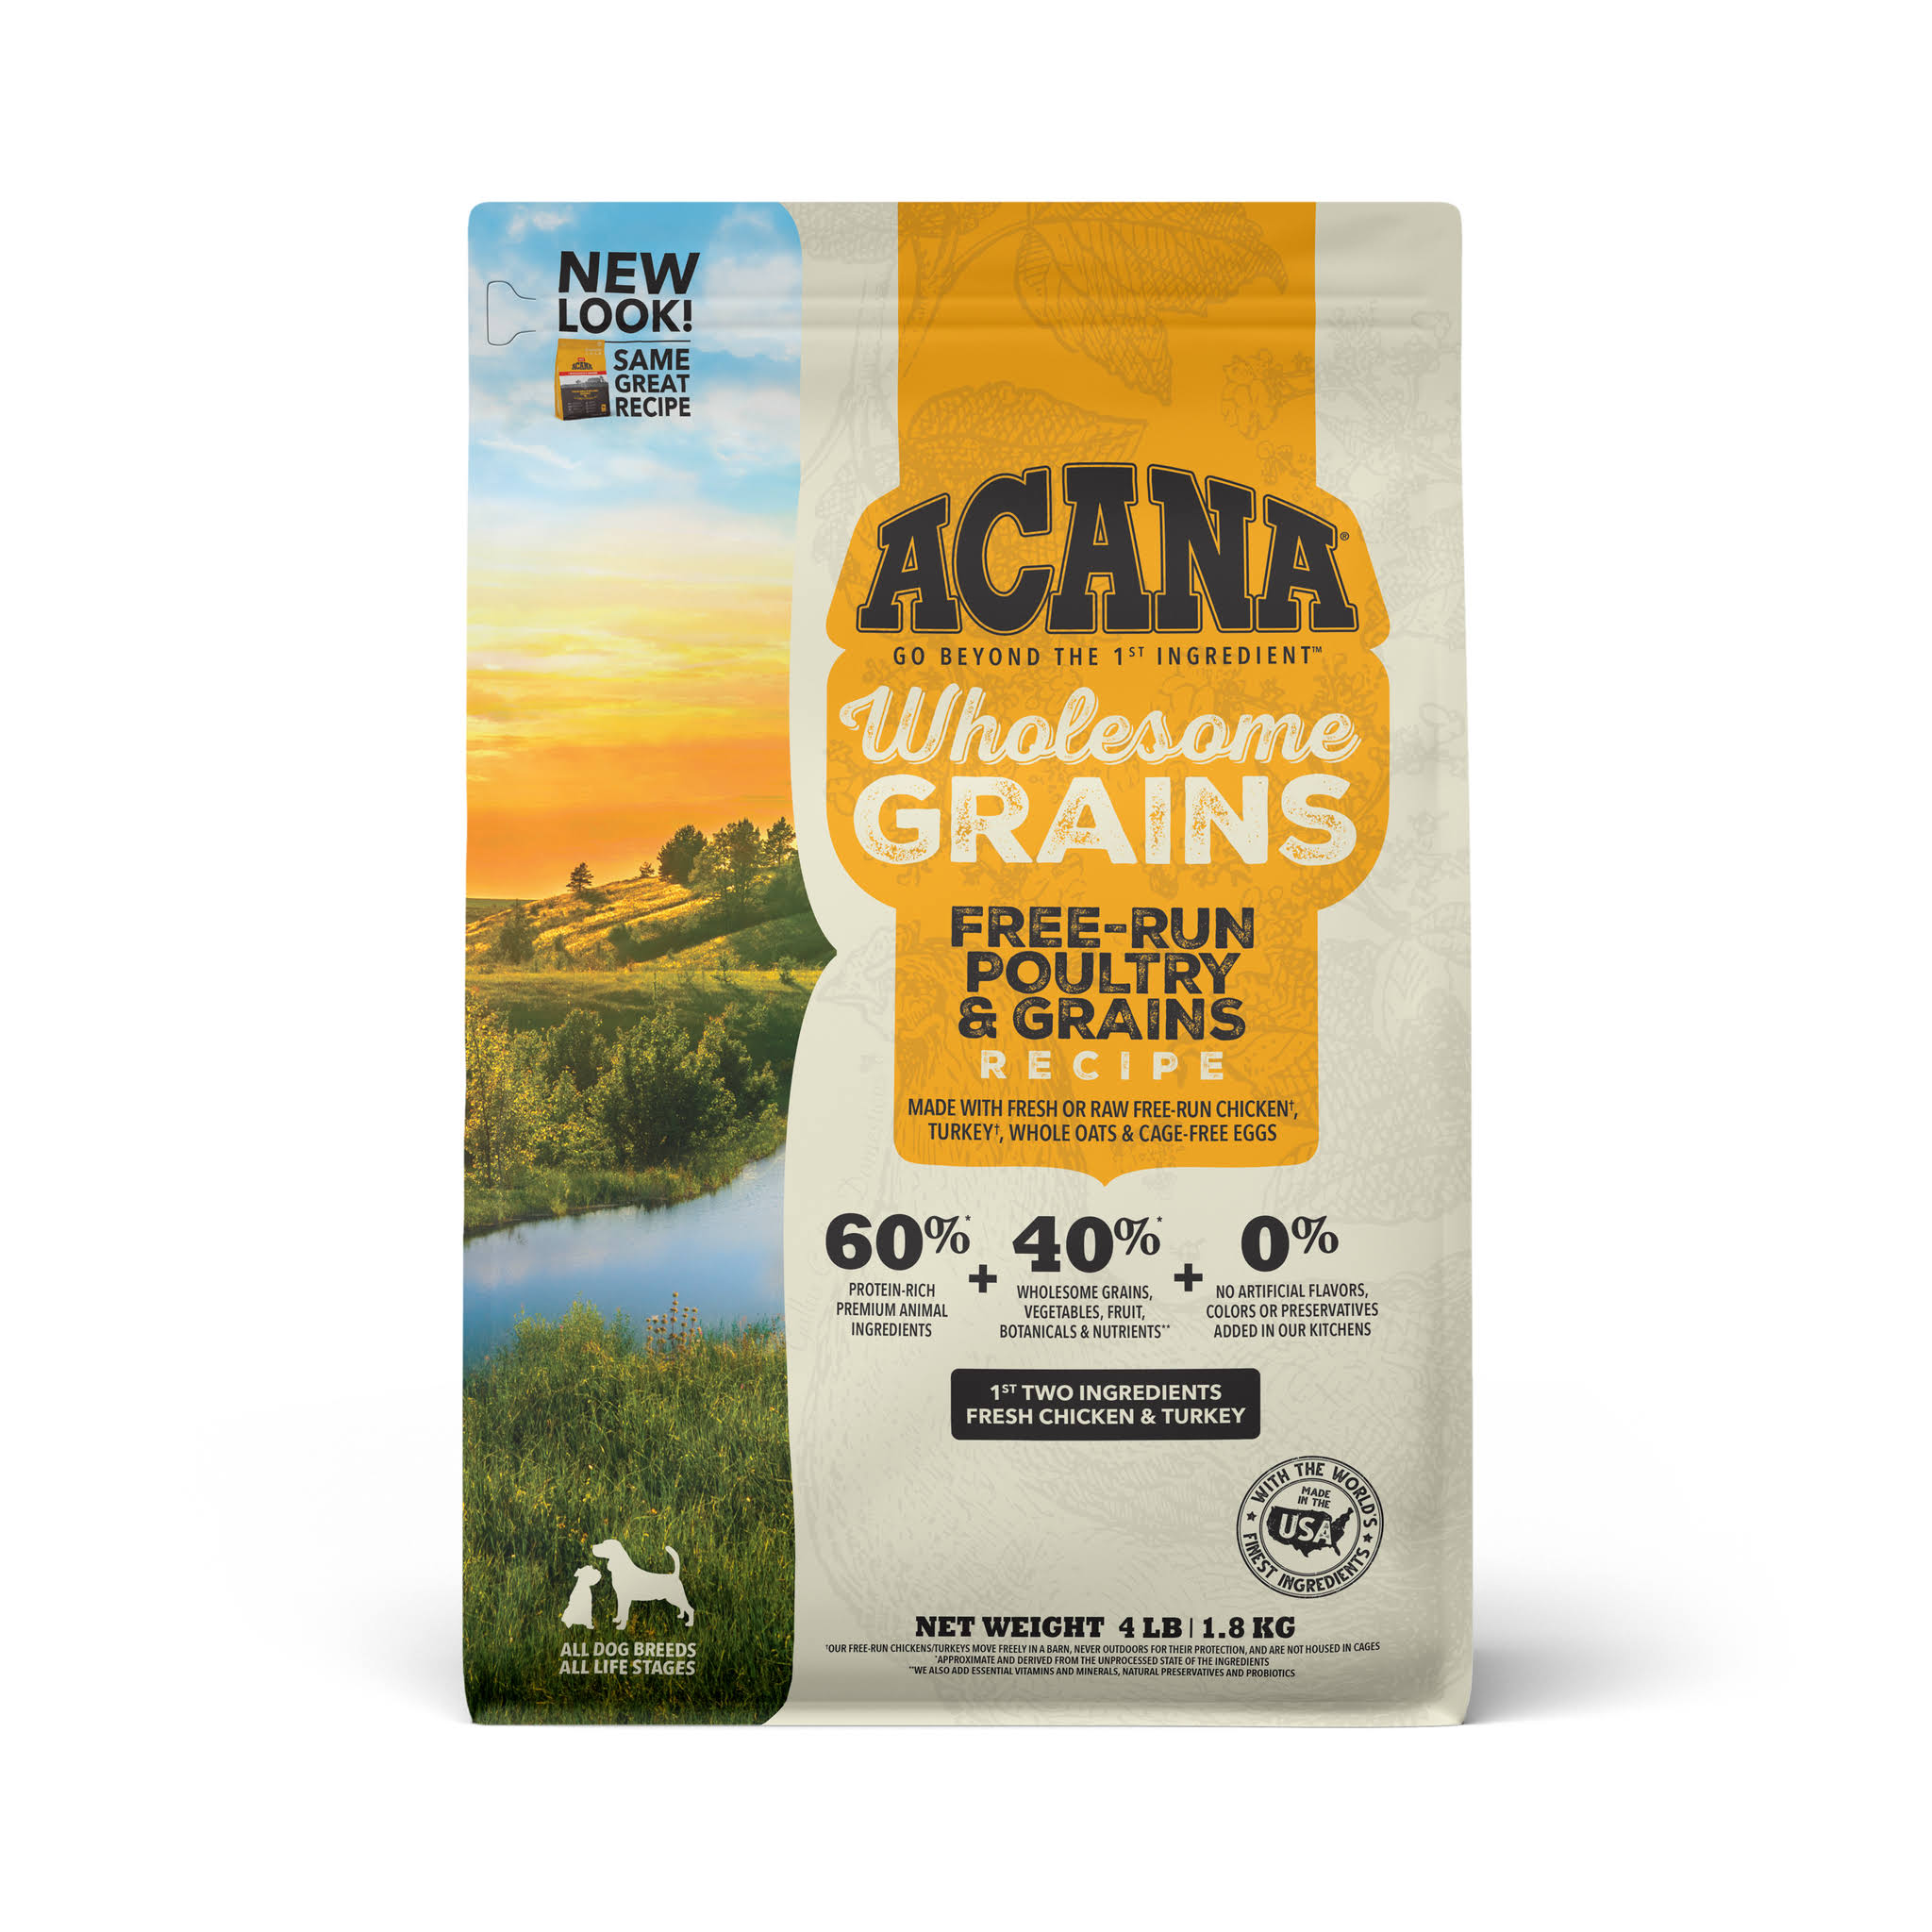 Acana Wholesome Grains Free-Run Poultry & Grains Recipe Dry Dog Food - 22.5 lb. Bag